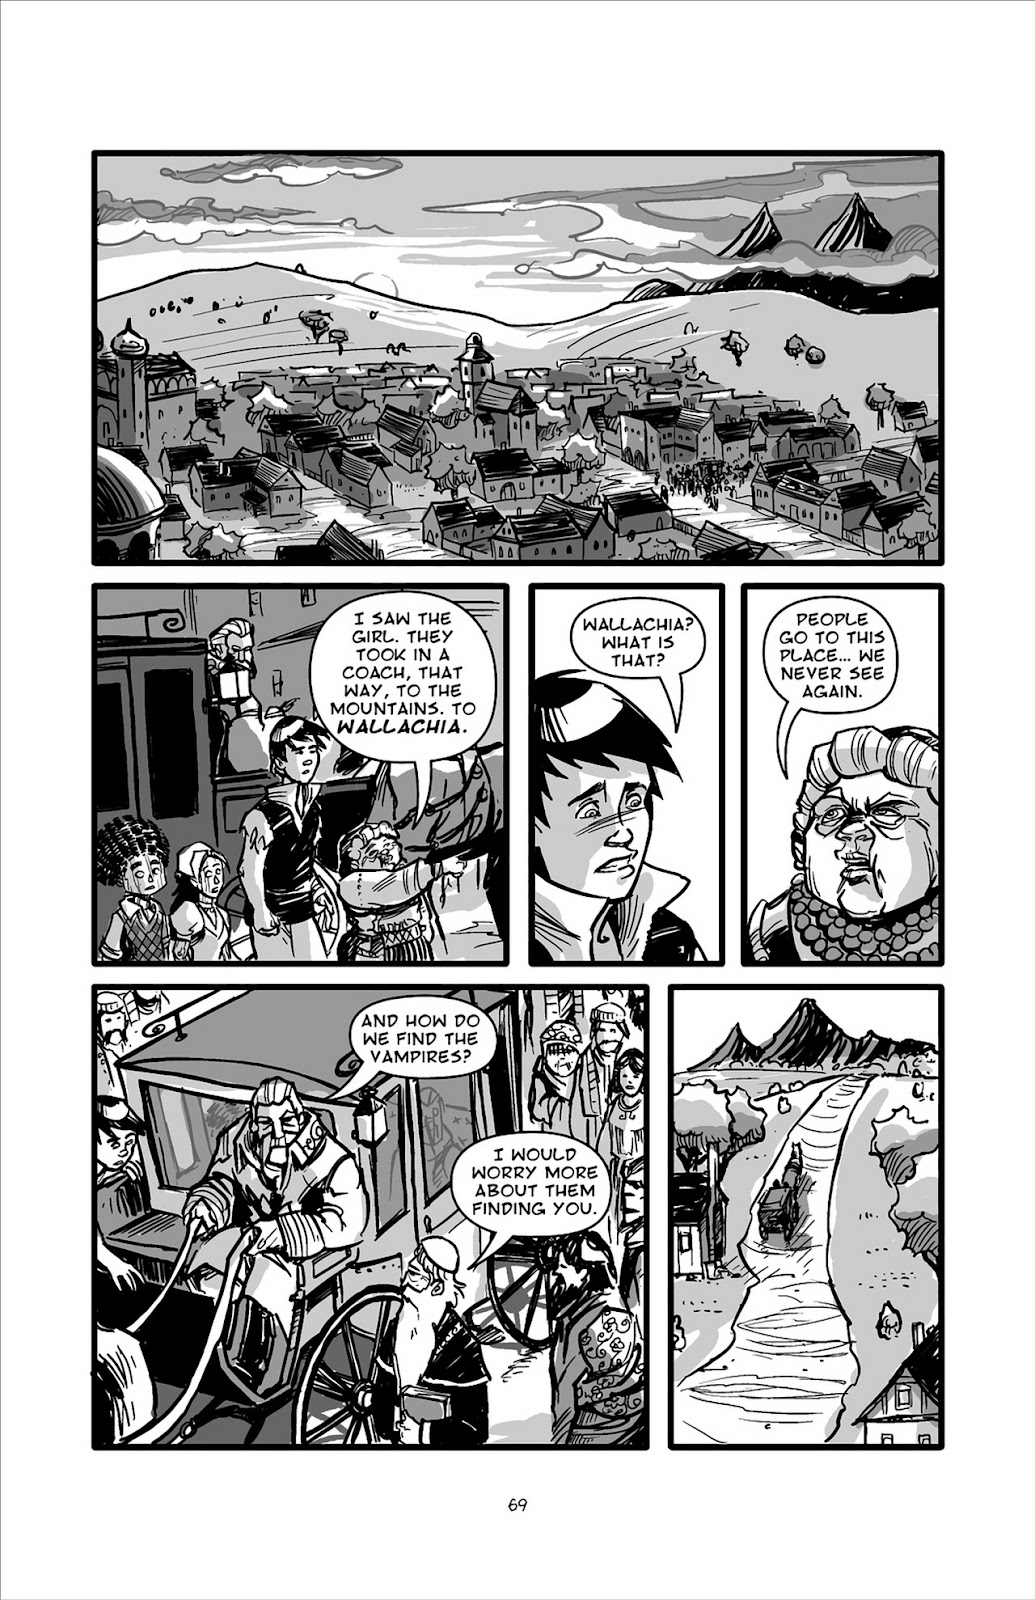 Pinocchio: Vampire Slayer - Of Wood and Blood issue 3 - Page 20